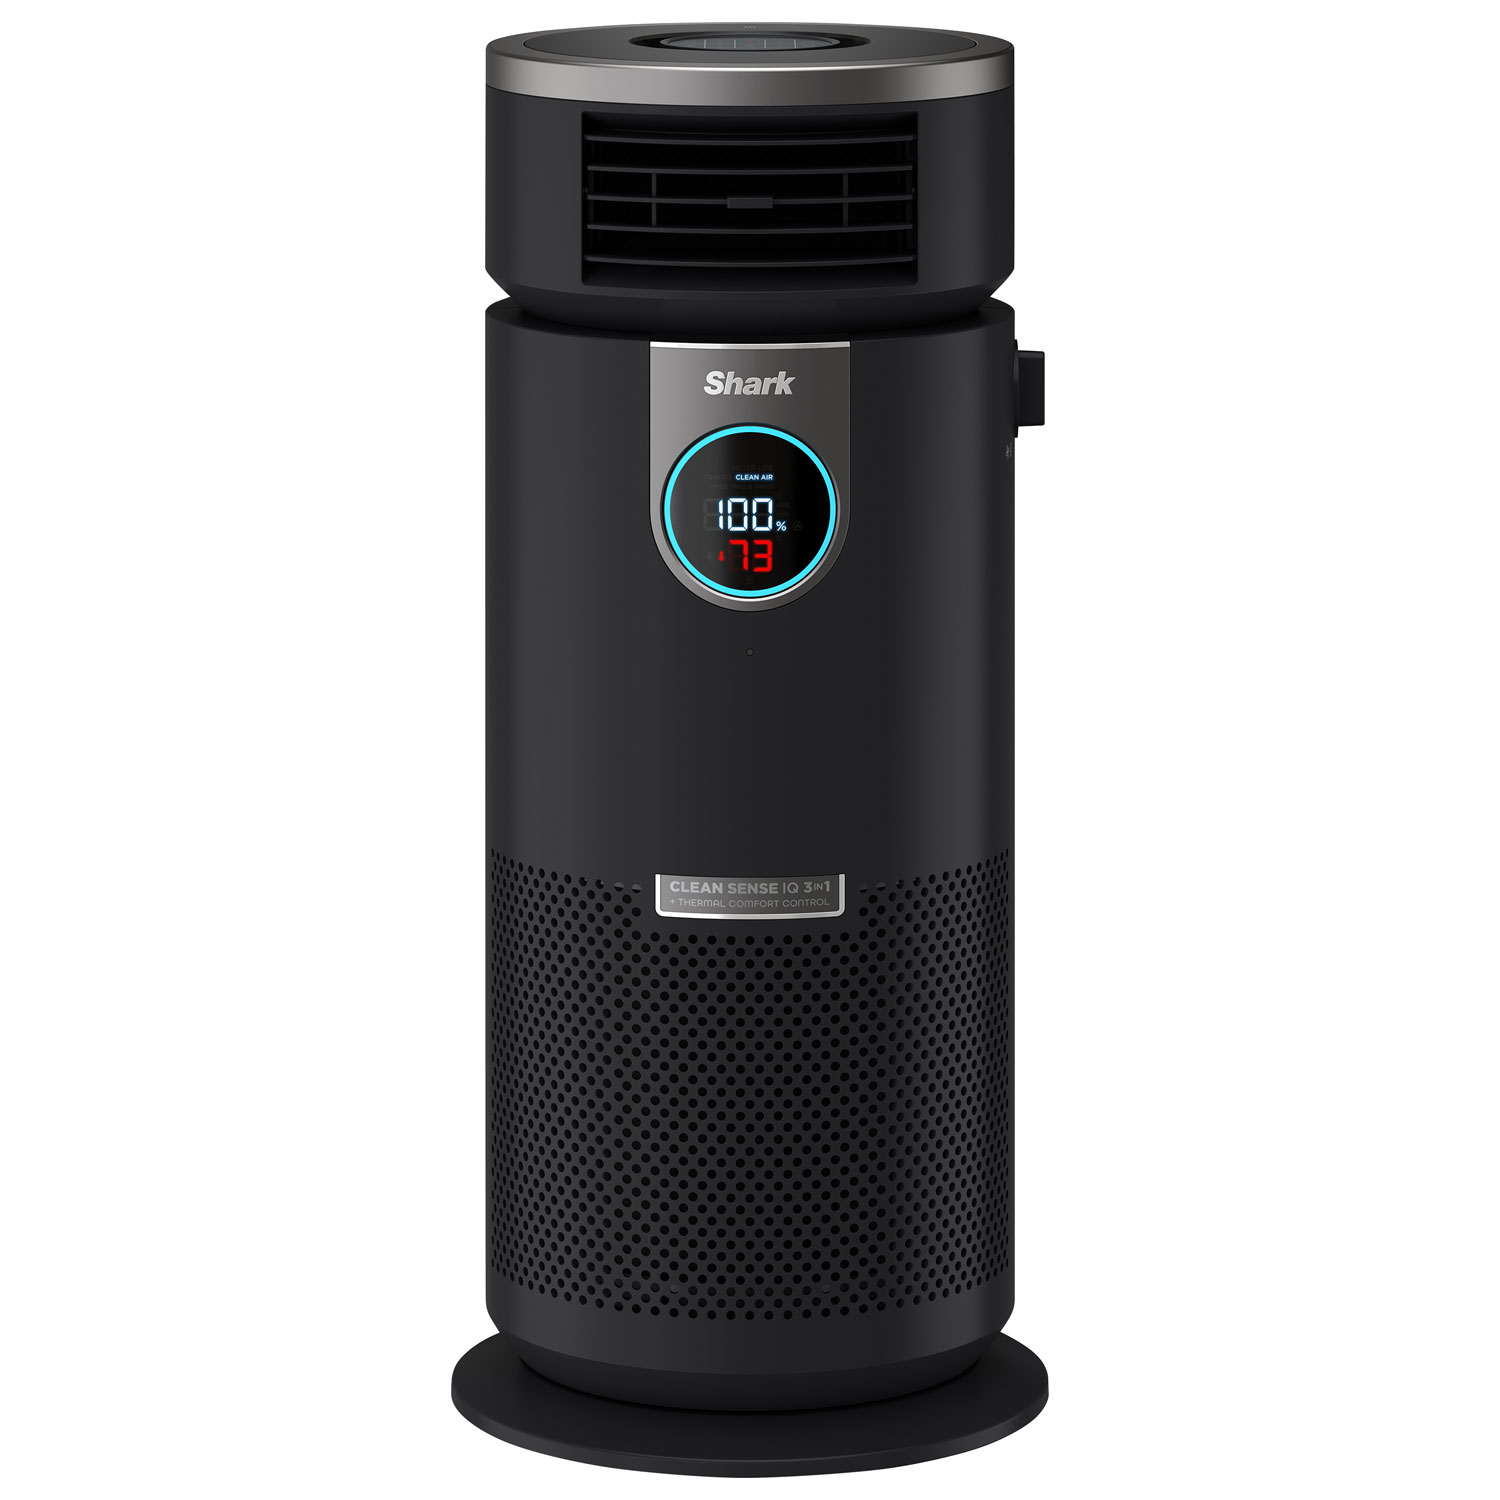 Shark HP450C 3-in-1 Air Purifier with HEPA Filter - Black